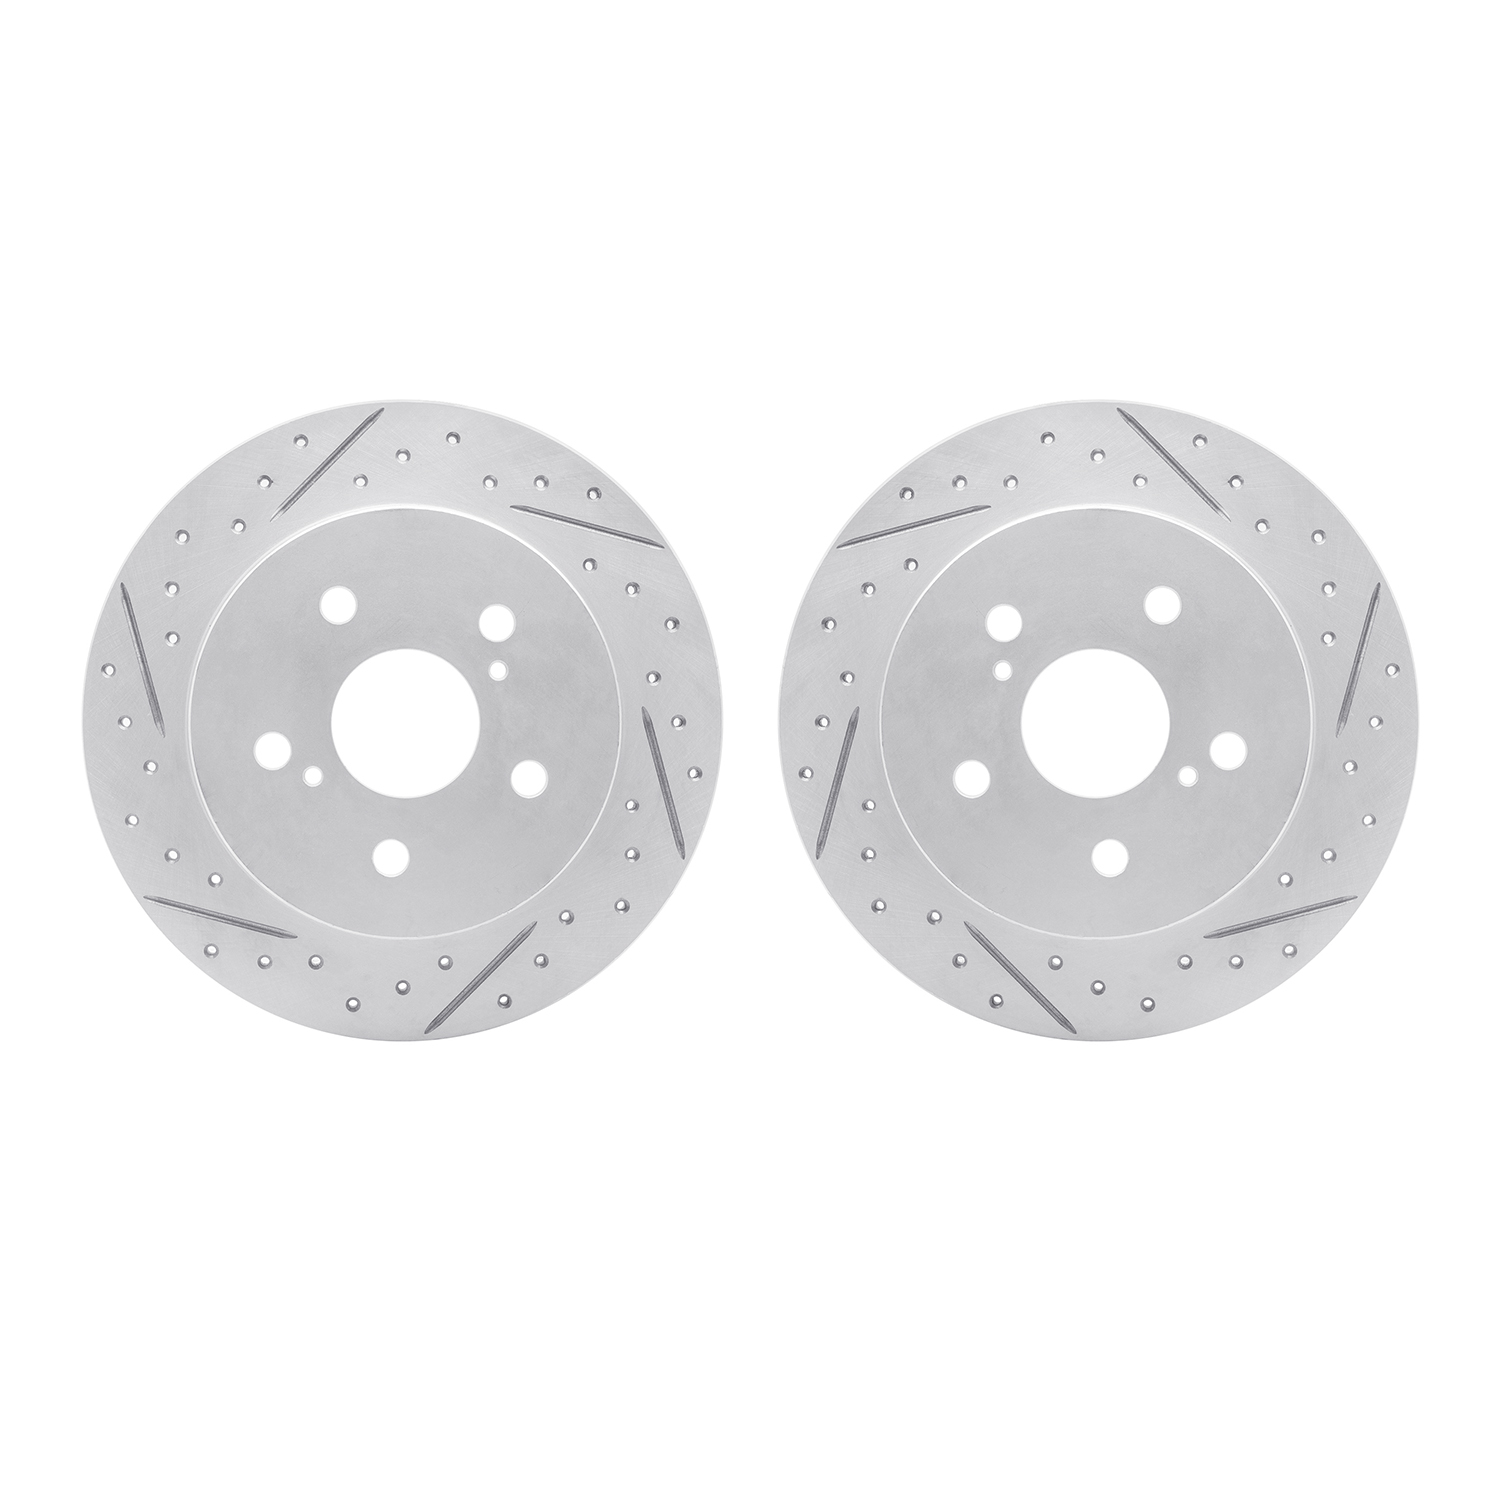 2002-75016 Geoperformance Drilled/Slotted Brake Rotors, Fits Select Lexus/Toyota/Scion, Position: Rear